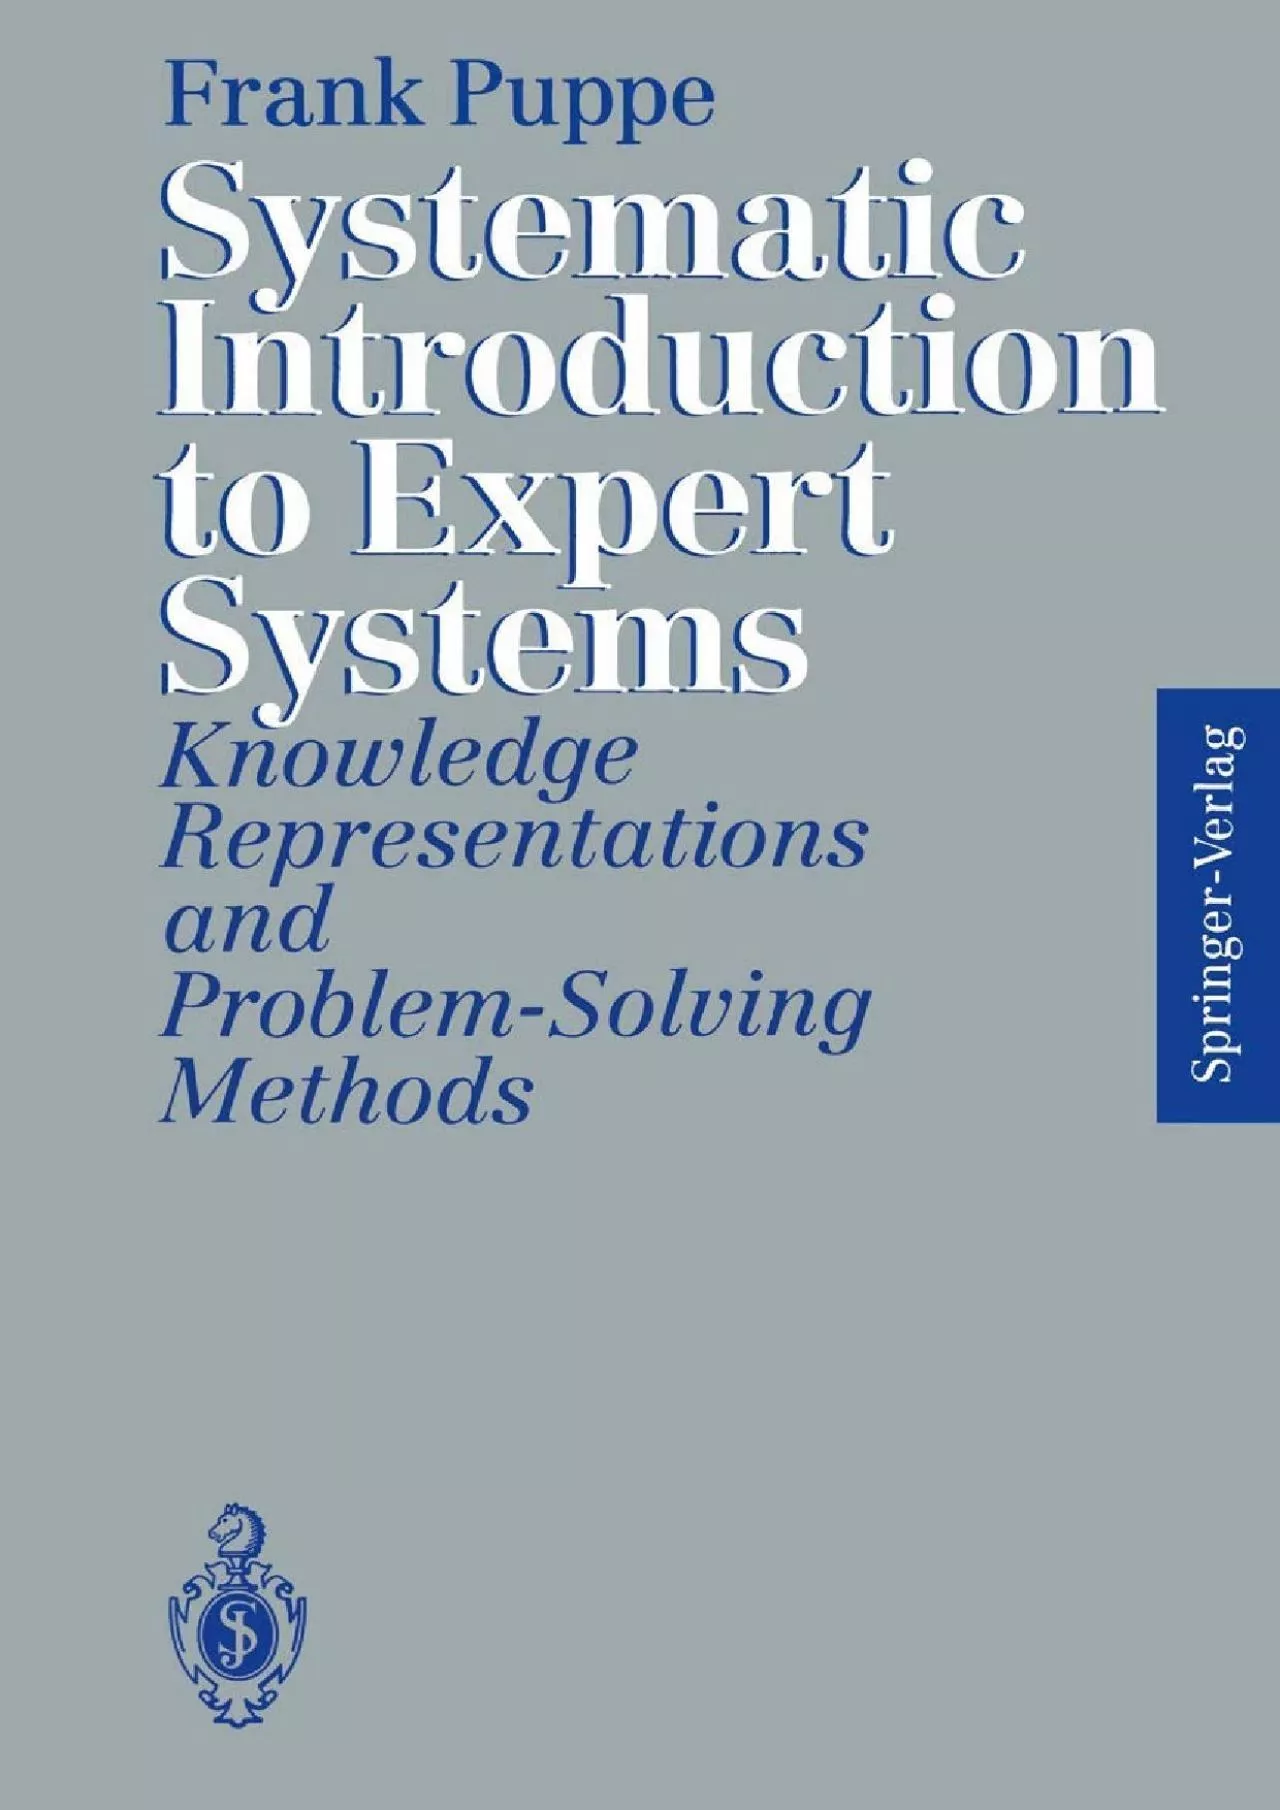 [DOWLOAD]-Systematic Introduction to Expert Systems: Knowledge Representations and Problem-Solving